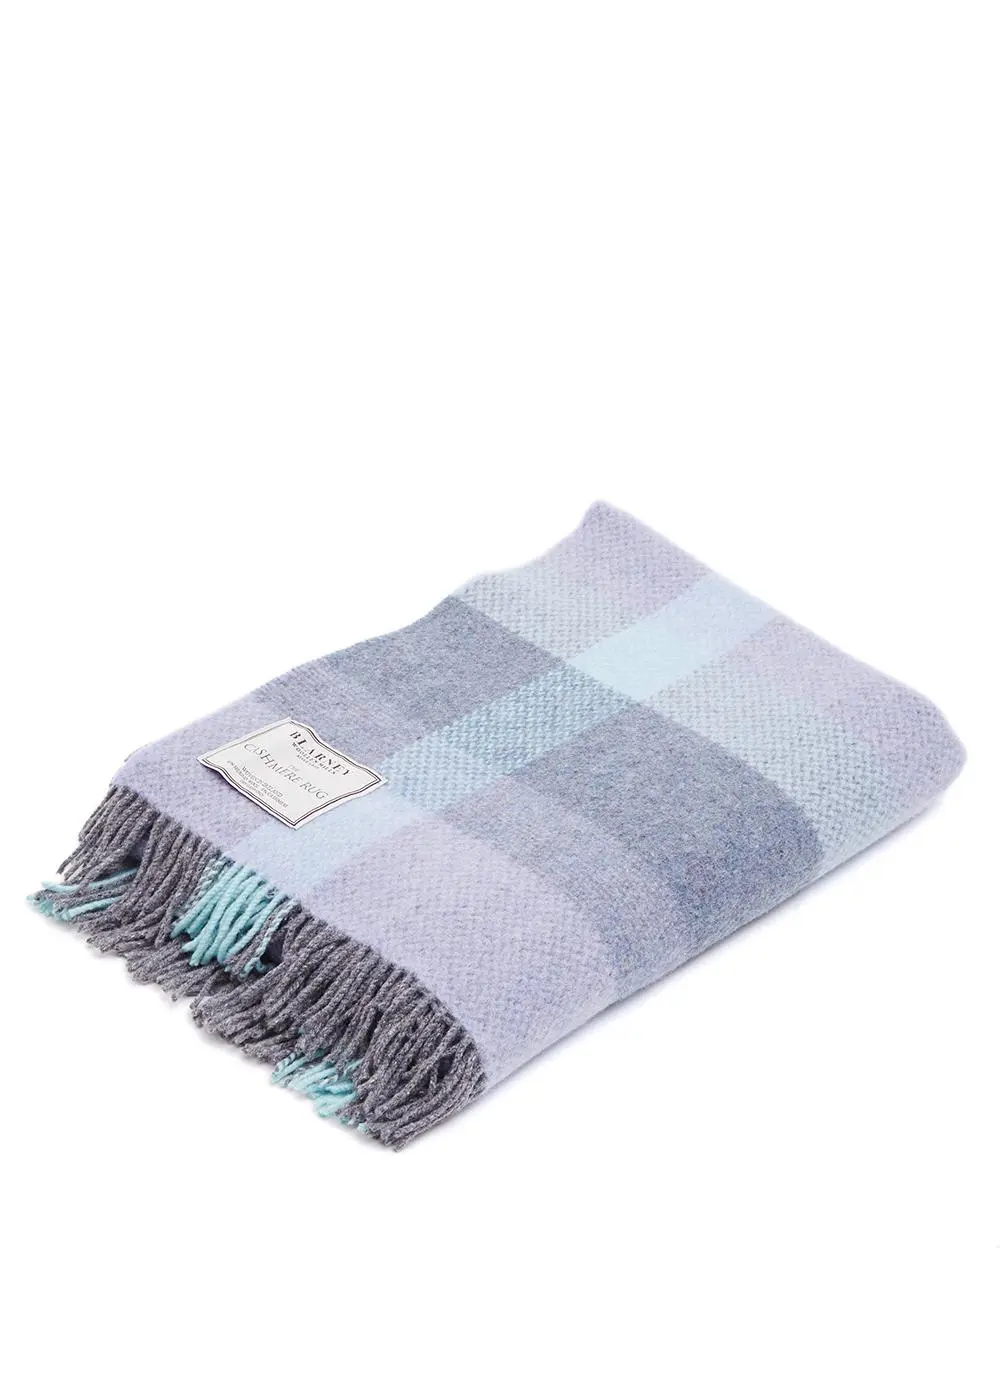 Lilac Dreams Wool Cashmere Throw